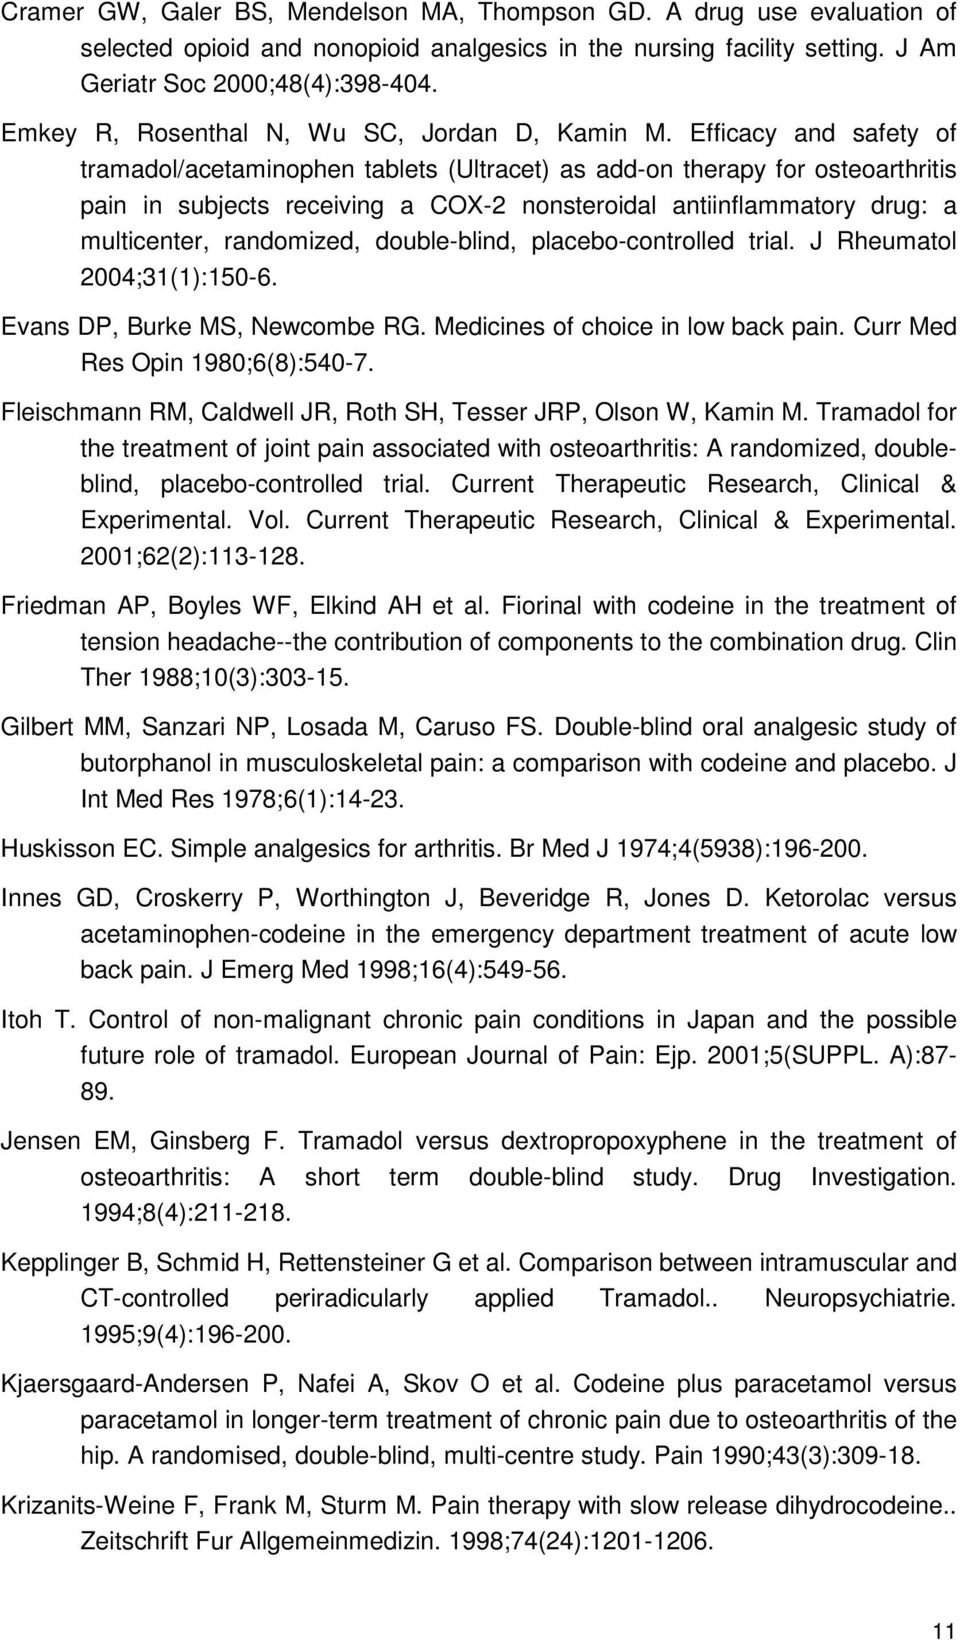 Efficacy and safety of tramadol/acetaminophen tablets (Ultracet) as add-on therapy for osteoarthritis pain in subjects receiving a COX-2 nonsteroidal antiinflammatory drug: a multicenter, randomized,